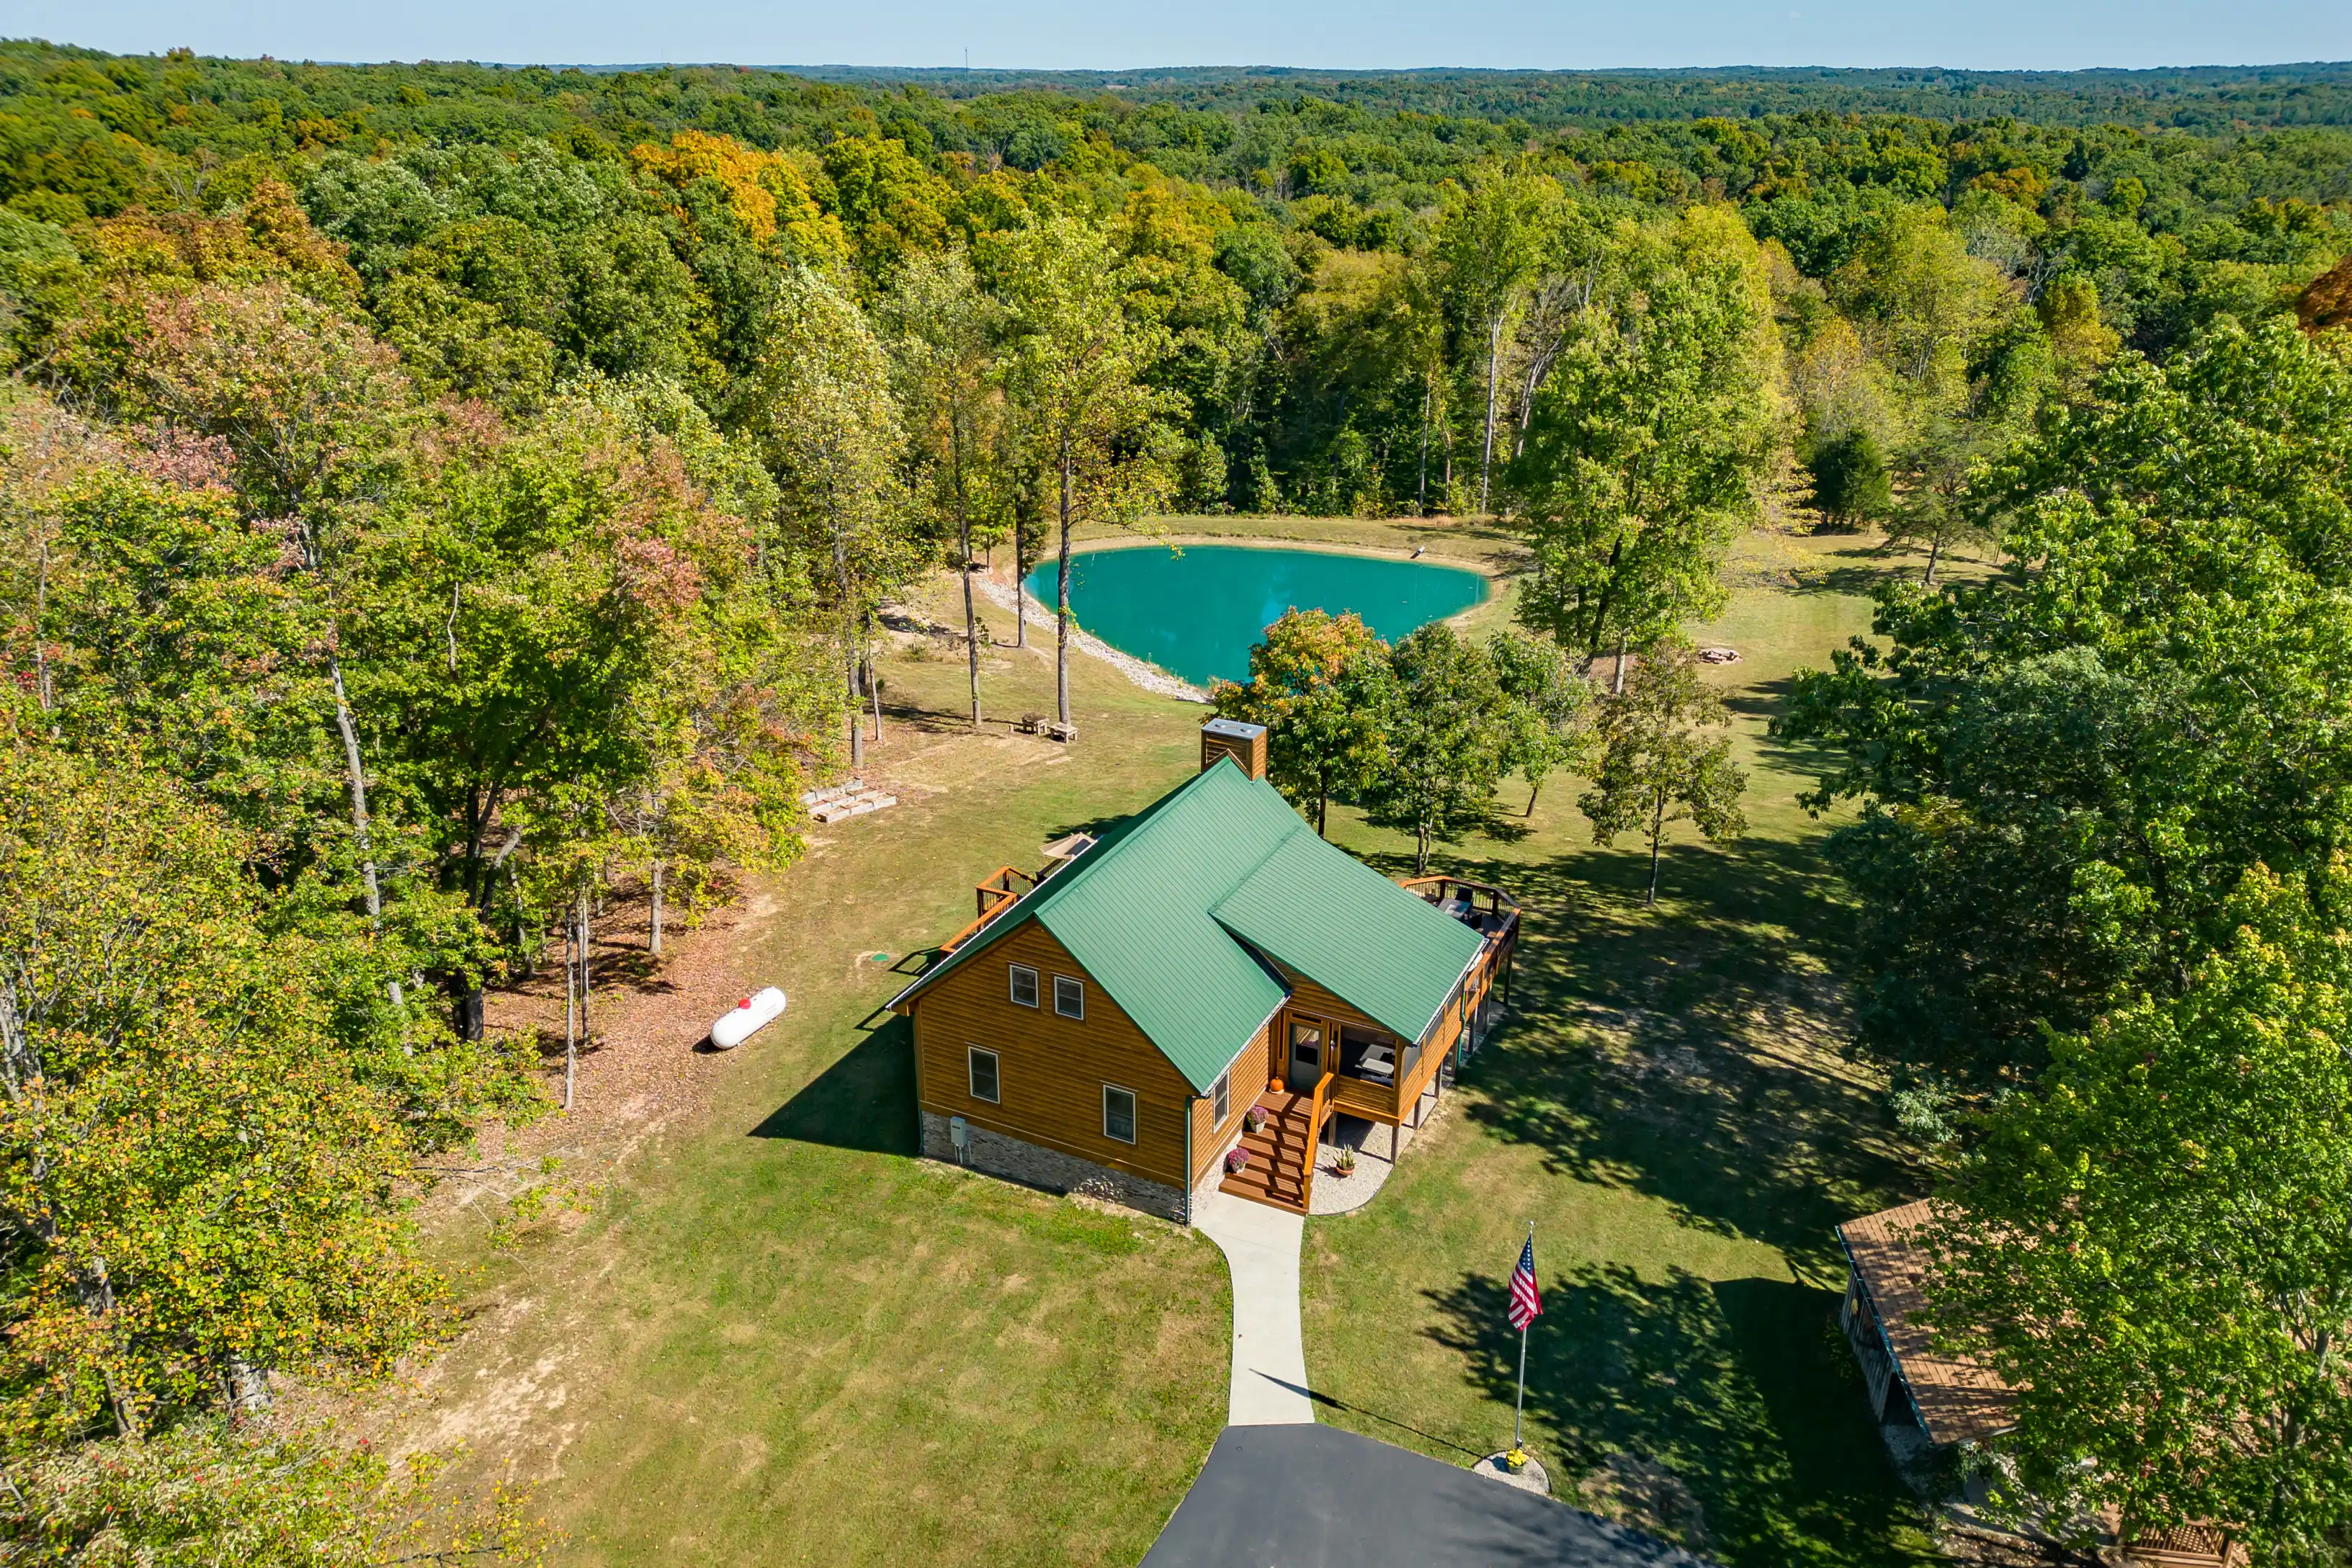 Aerial view of a log cabin with a green roof surrounded by lush trees, next to a small pond in a forested area, with an American flag in the foreground.